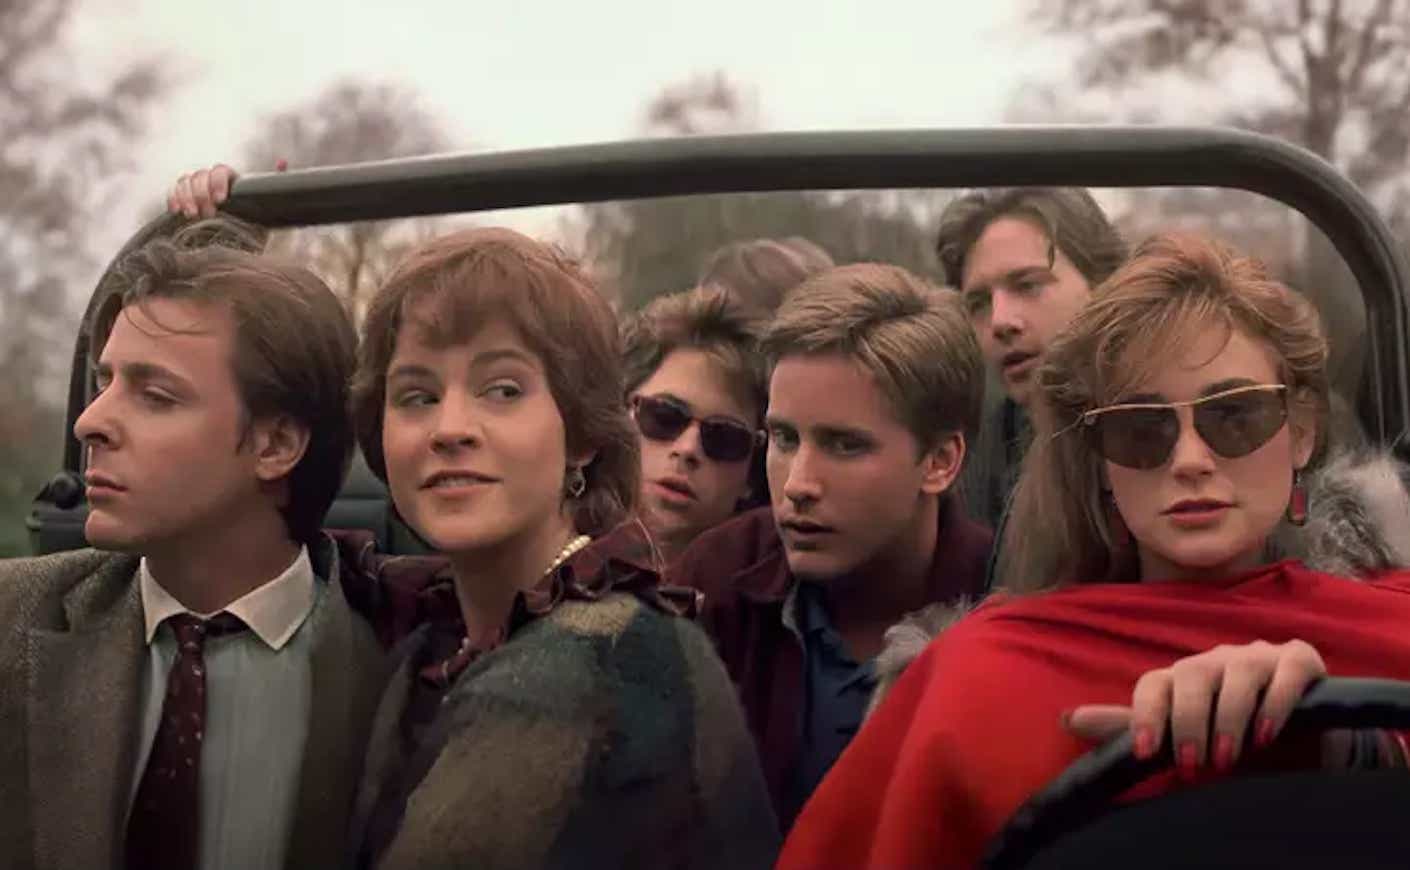 the cast of st. elmo's fire